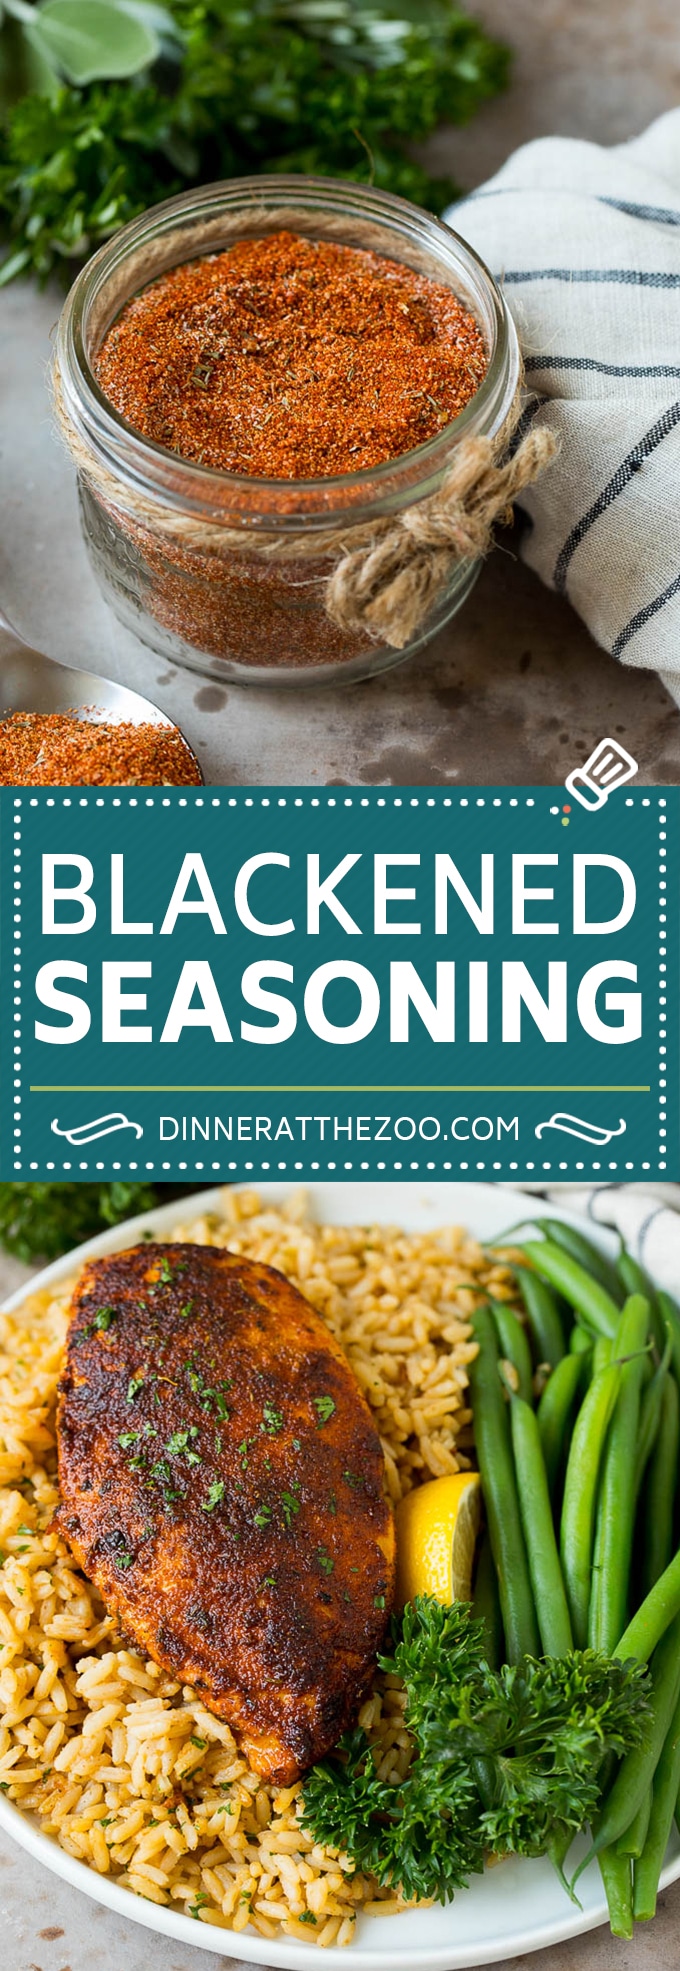 This blackened seasoning is a blend of herbs and spices that are combined to produce a savory rub that takes minutes to put together.